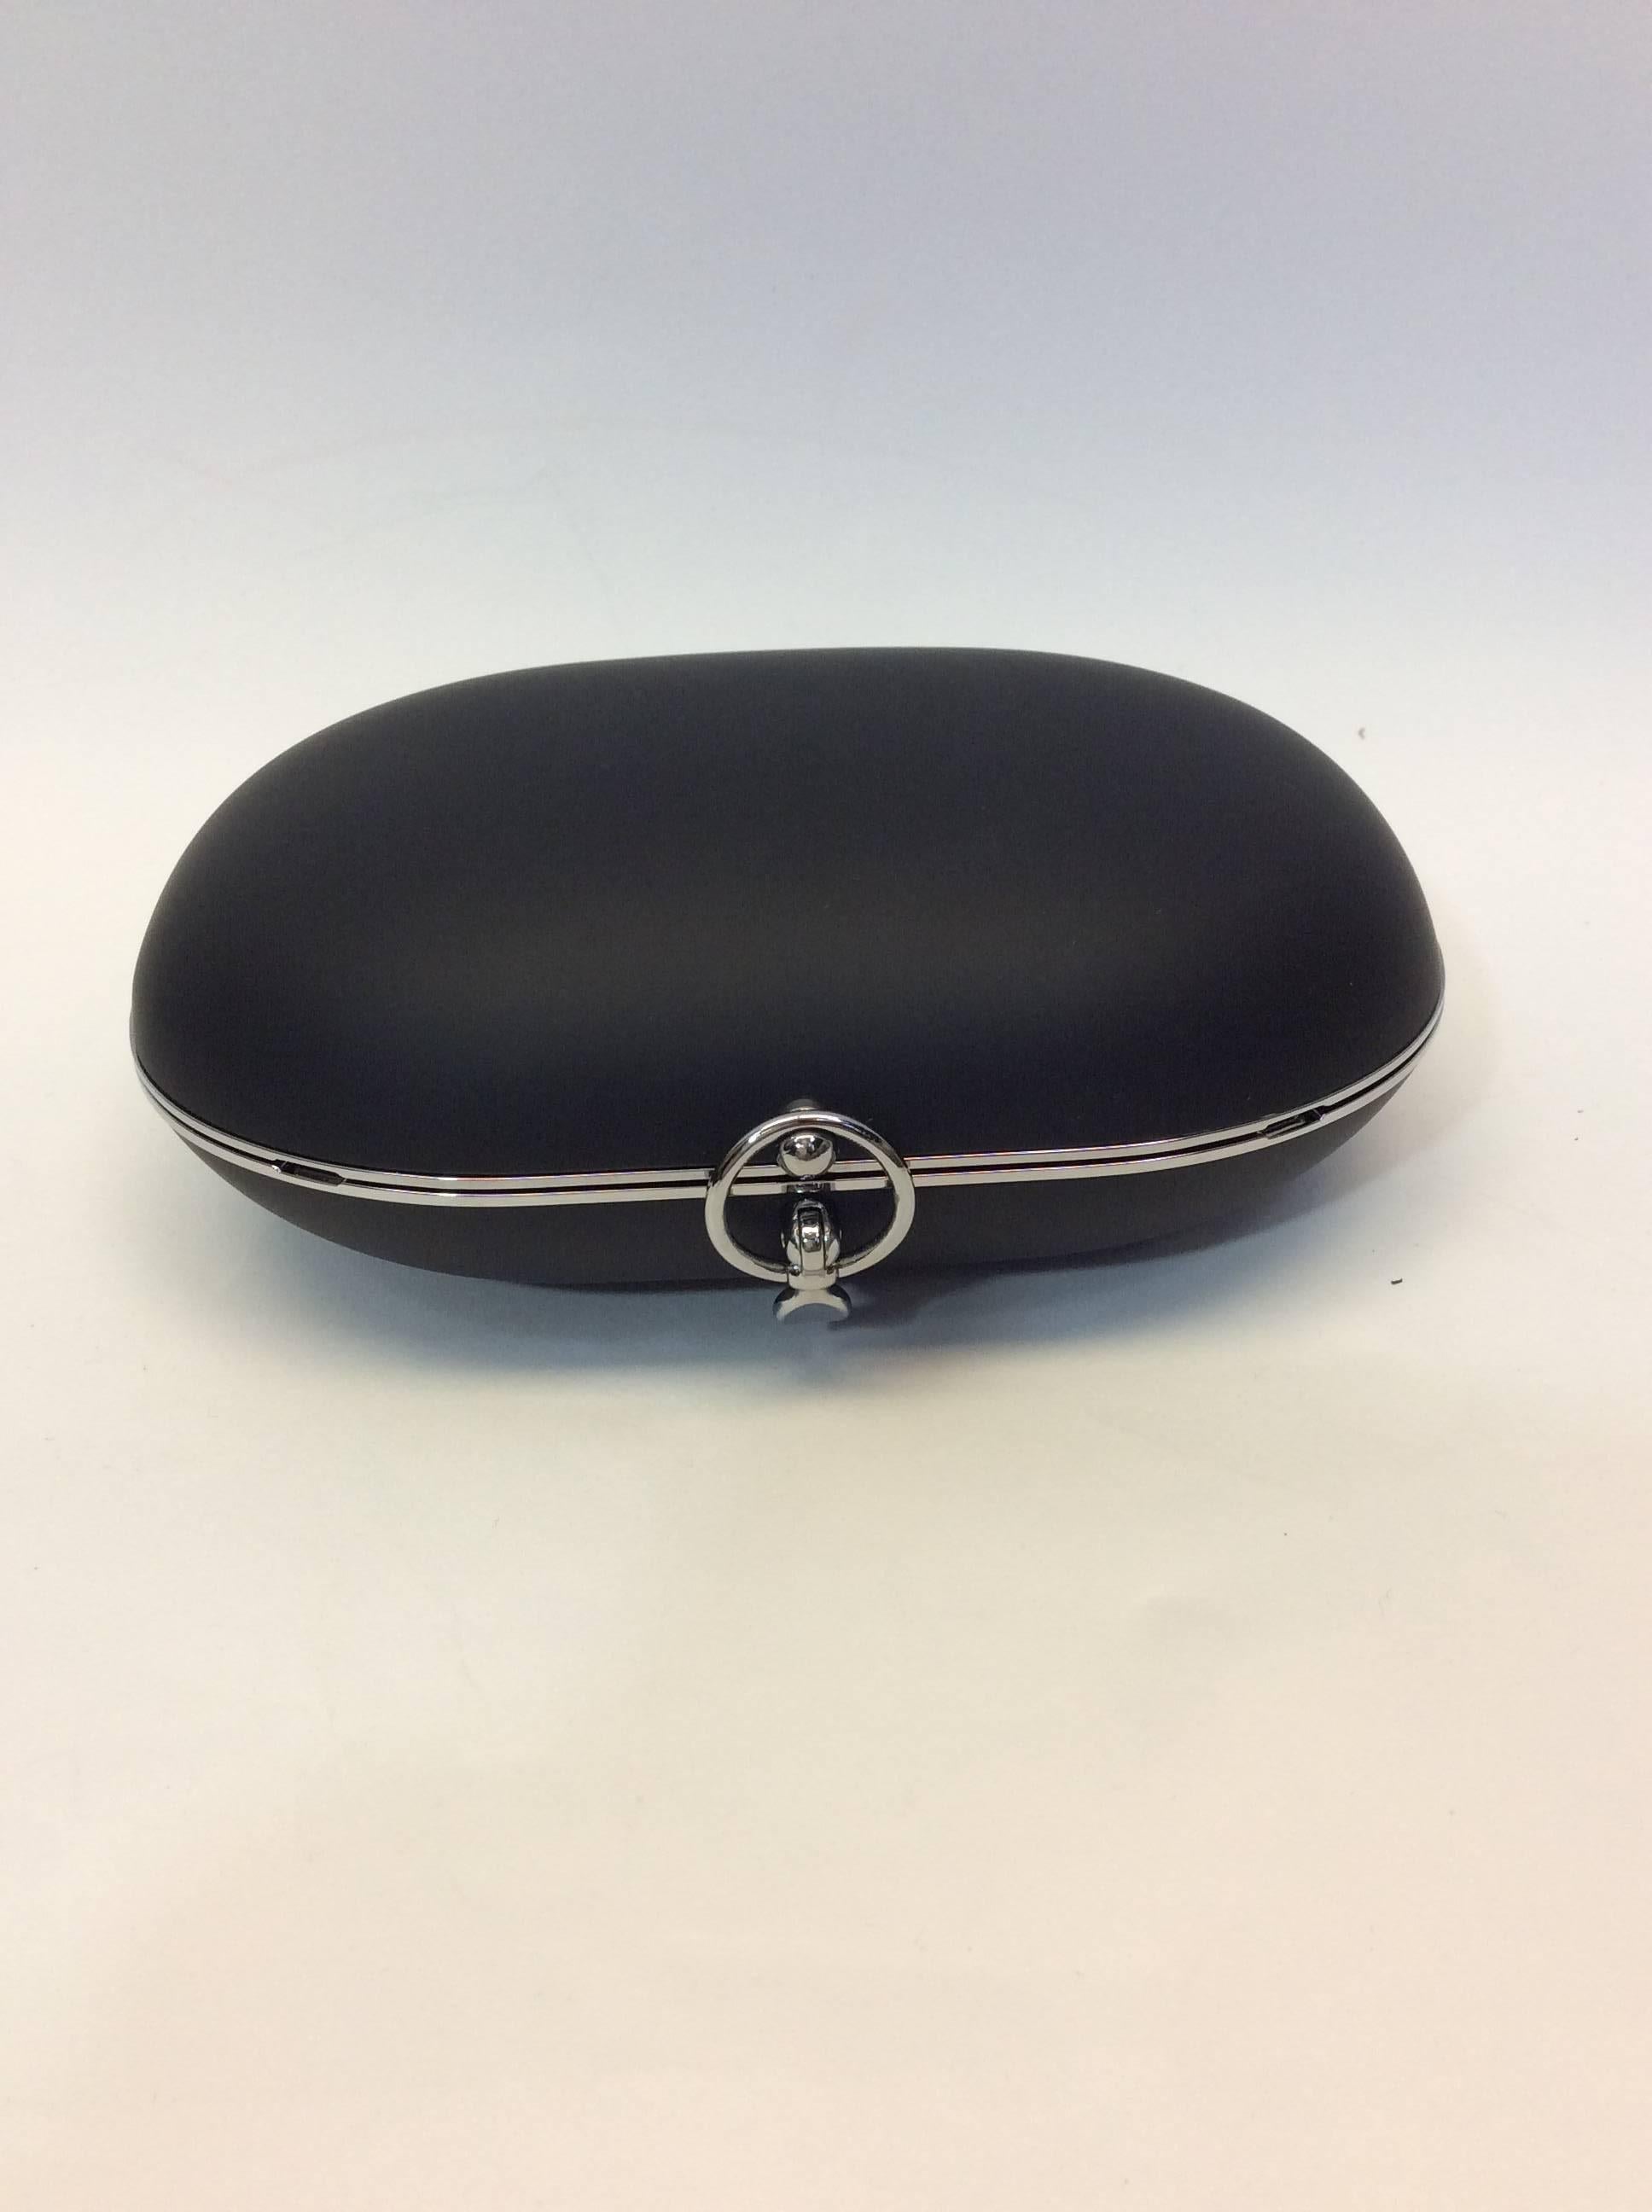 Black Egg Clutch
5 inches tall, 7.5 inches wide, 1.5 inches deep
Includes 30 inch removable shoulder strap
Clasp closure on top of bag
Features two open interior pockets
Aerospace aluminum and Italian lambskin